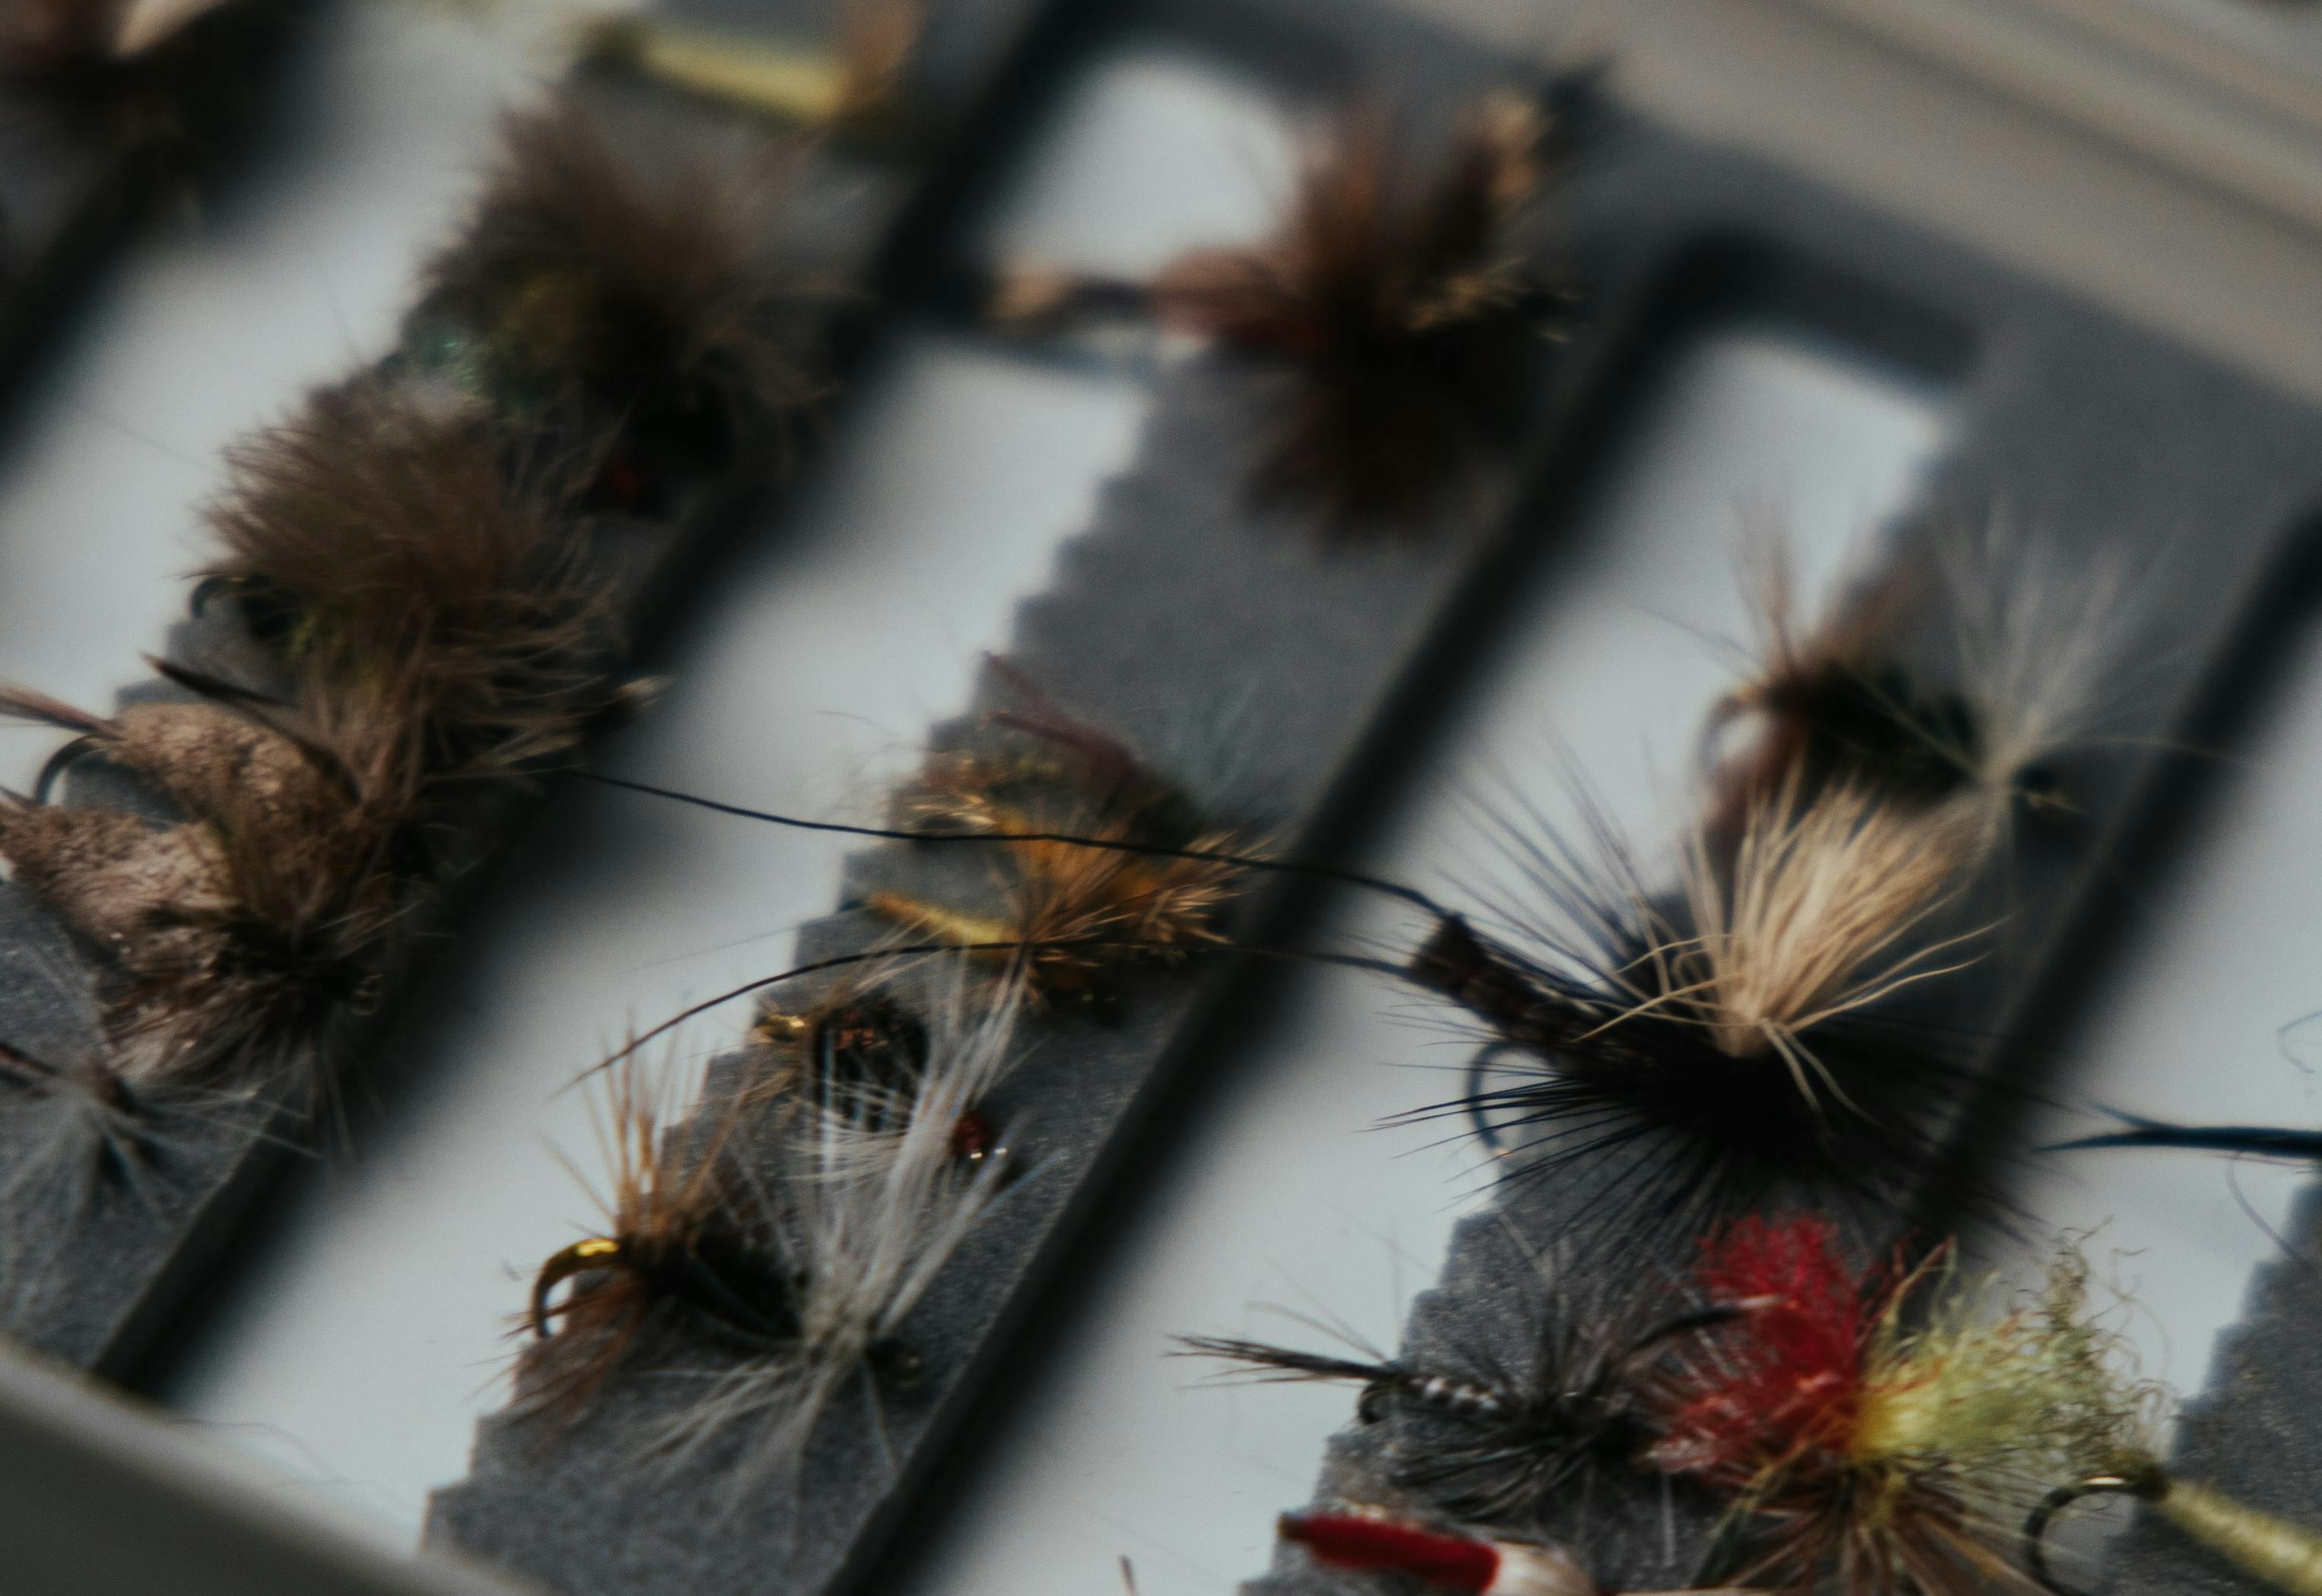 An Expert Guide to the 12 Best Dry Flies | Curated.com